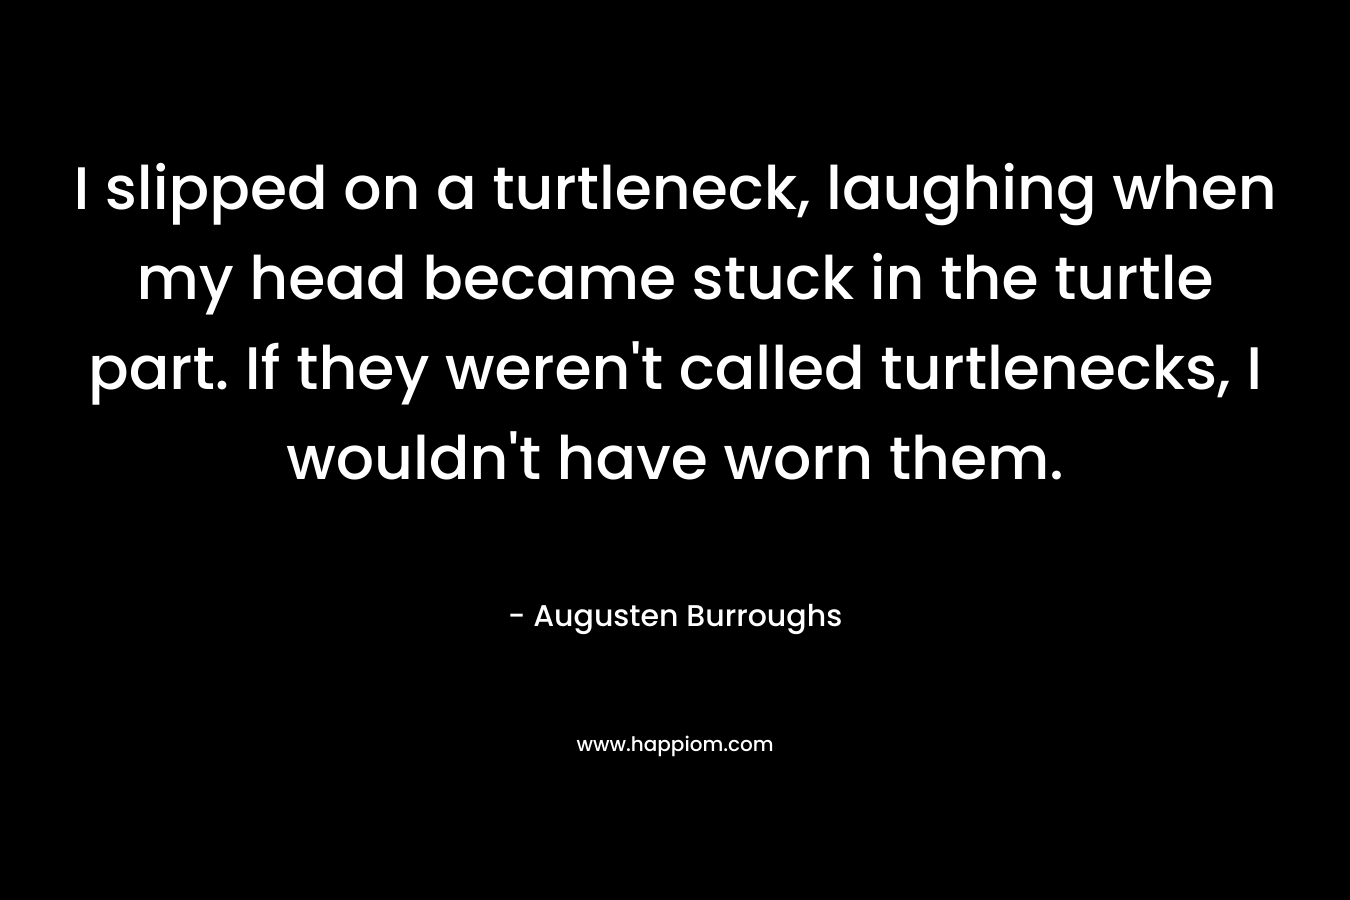 I slipped on a turtleneck, laughing when my head became stuck in the turtle part. If they weren’t called turtlenecks, I wouldn’t have worn them. – Augusten Burroughs